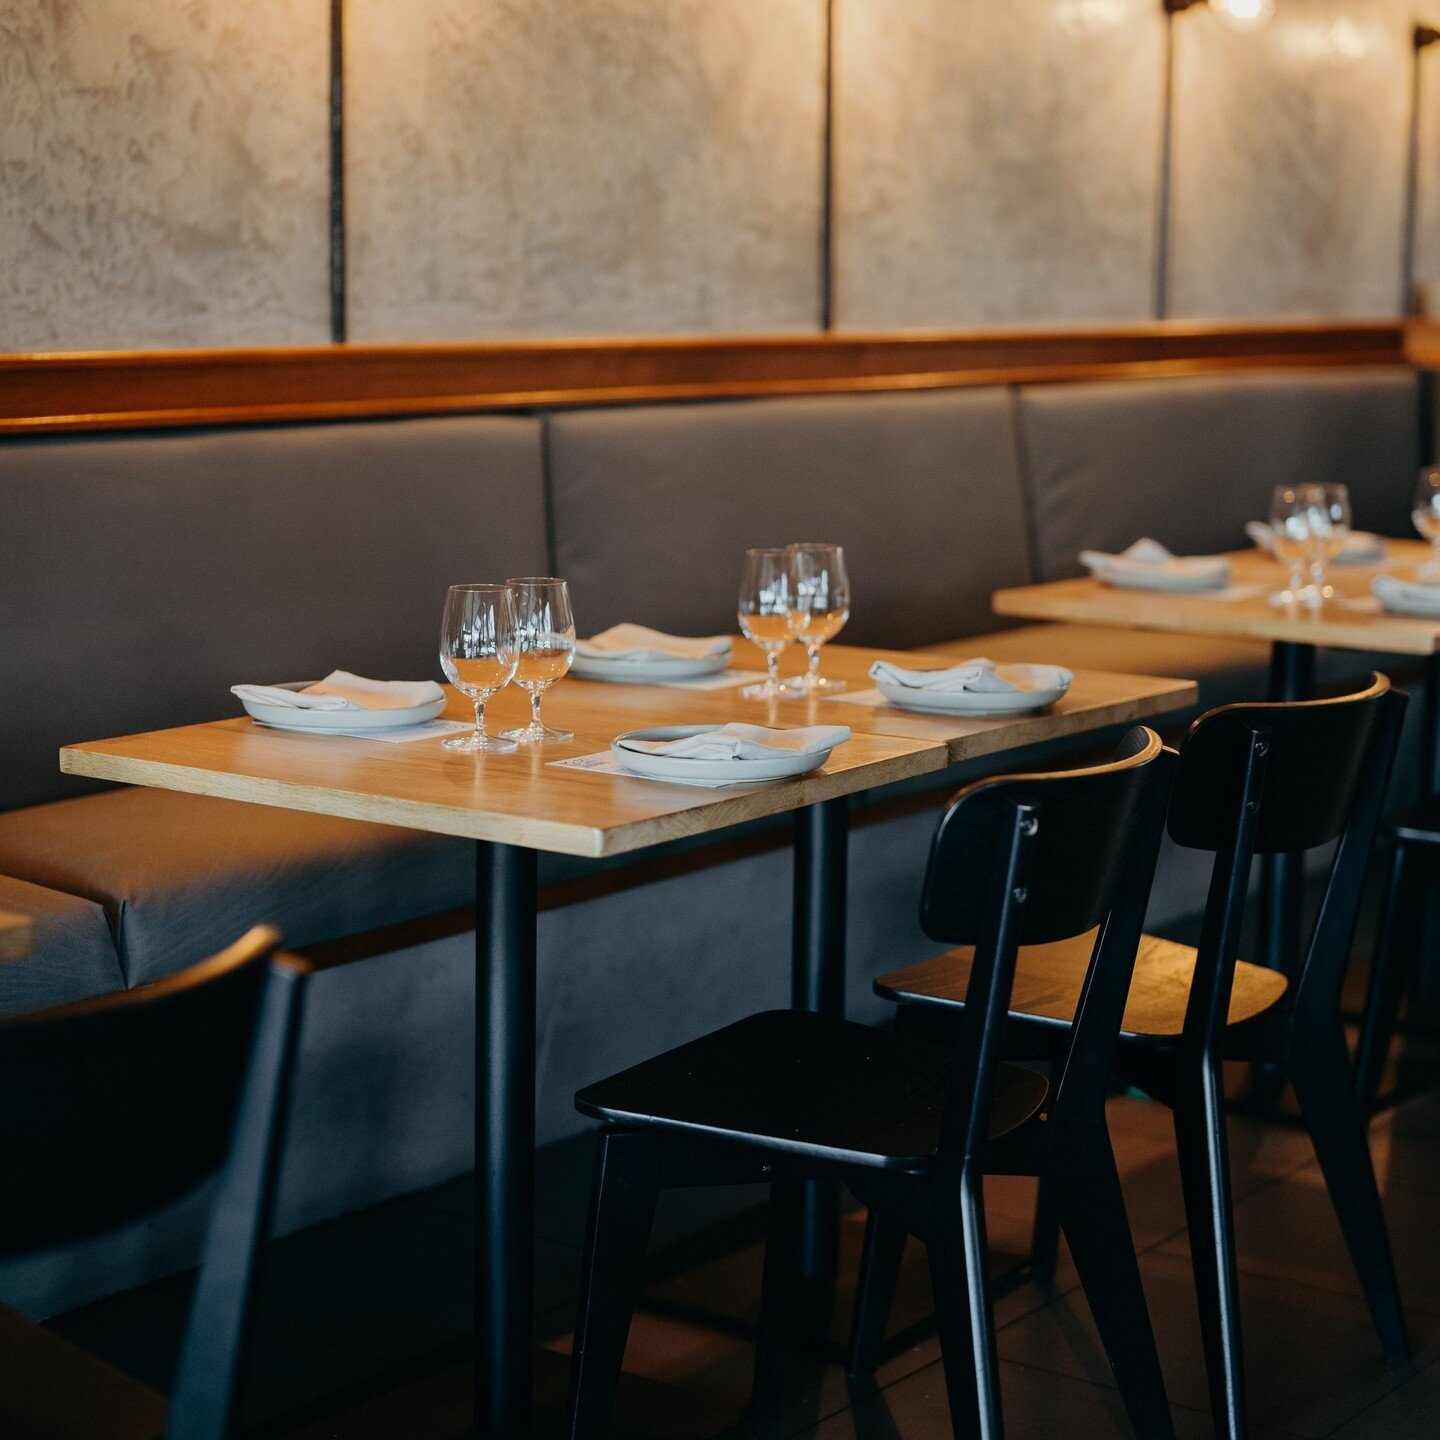 A few tables on Valentine's Day remain (that's this Wednesday). We're hosting a $95 p/p set menu that includes:⁠
⁠
Paloma on arrival⁠
Tuna &amp; organic local, wasabi cannoli⁠
Local salumi plate, pickles, toasted flat bread⁠
Gnocchi sardi, mussels &a